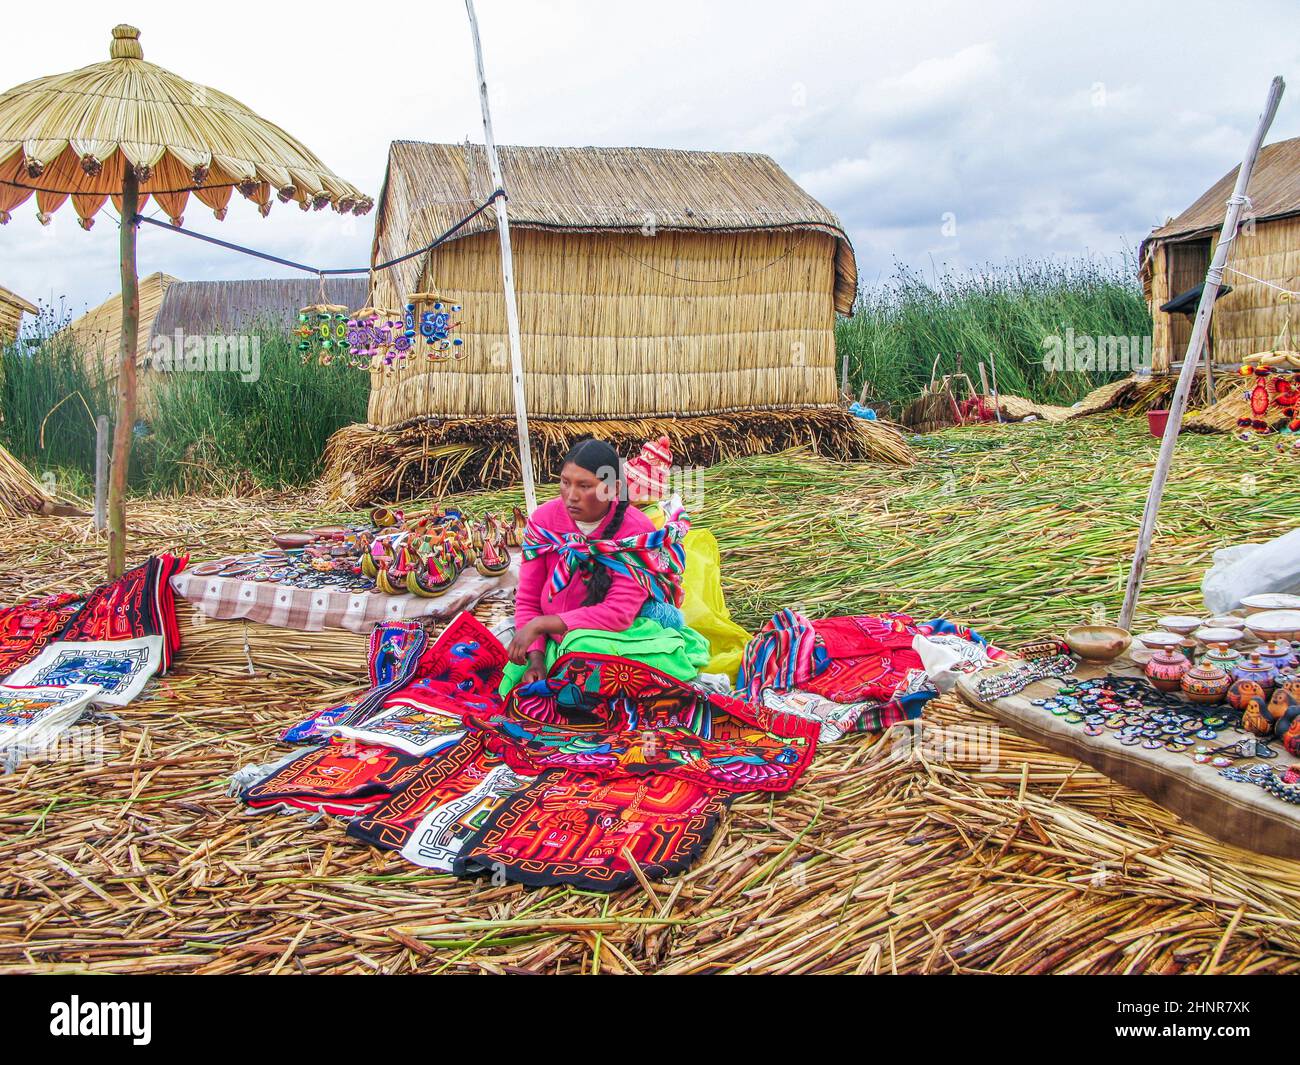 Local women in traditional attire work sell handicrafts Stock Photo